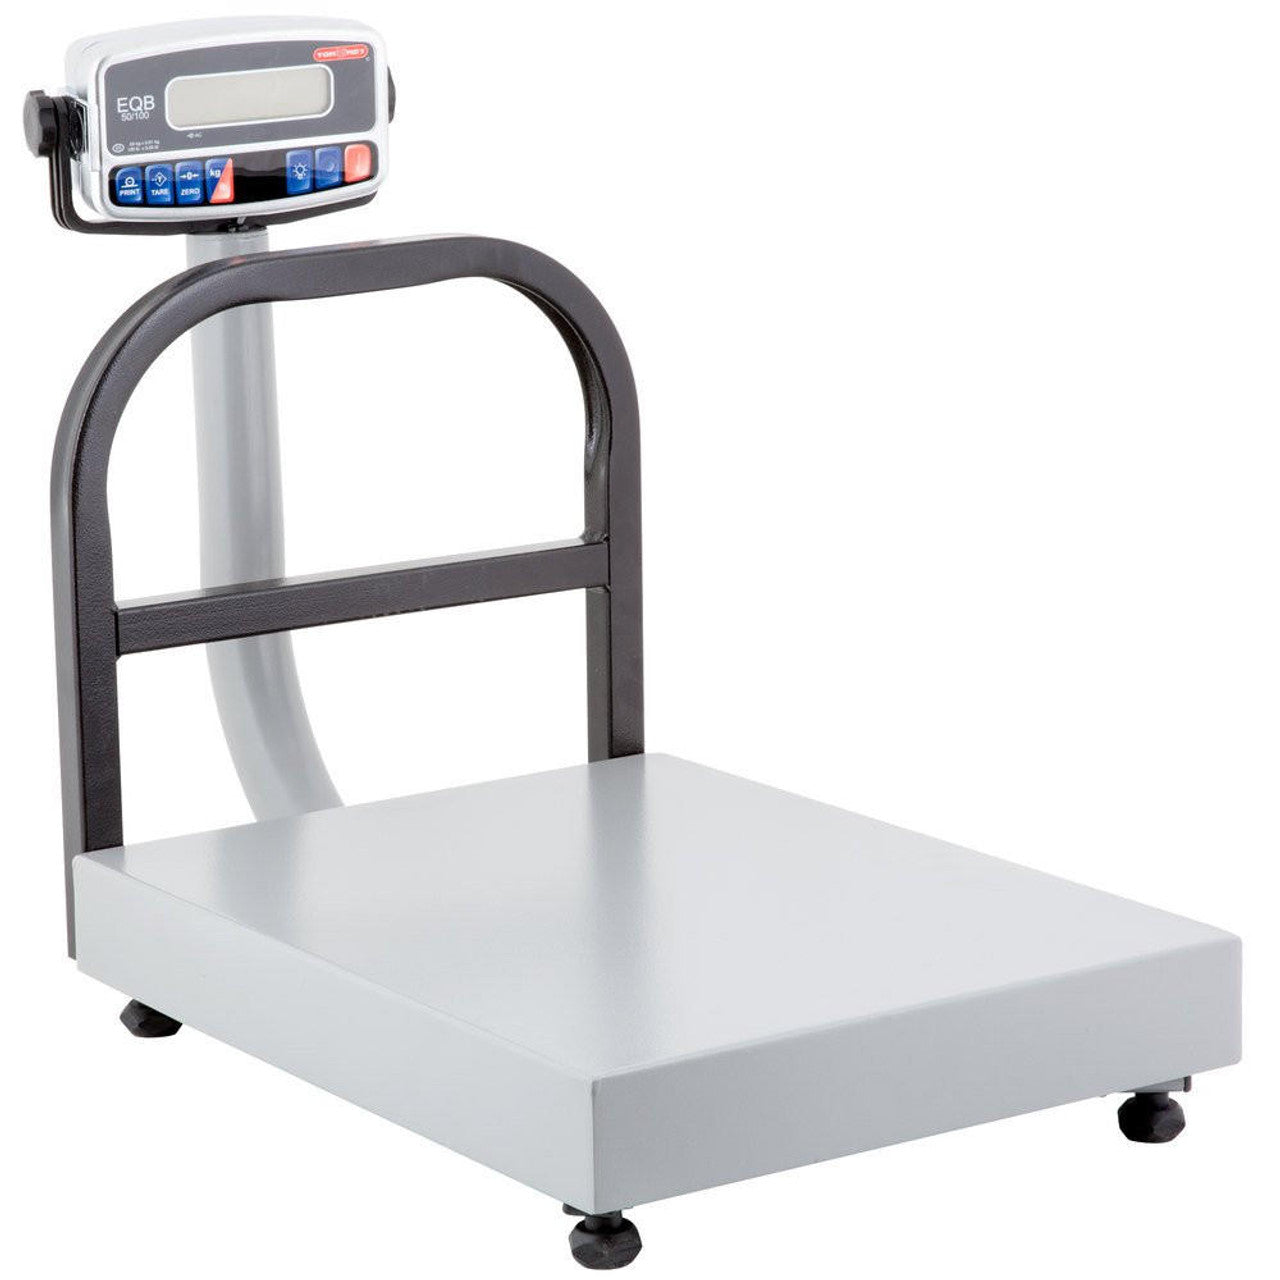 Torrey EQB-50/100 Receiving Bench Scale 50kg/100lb with Warranty